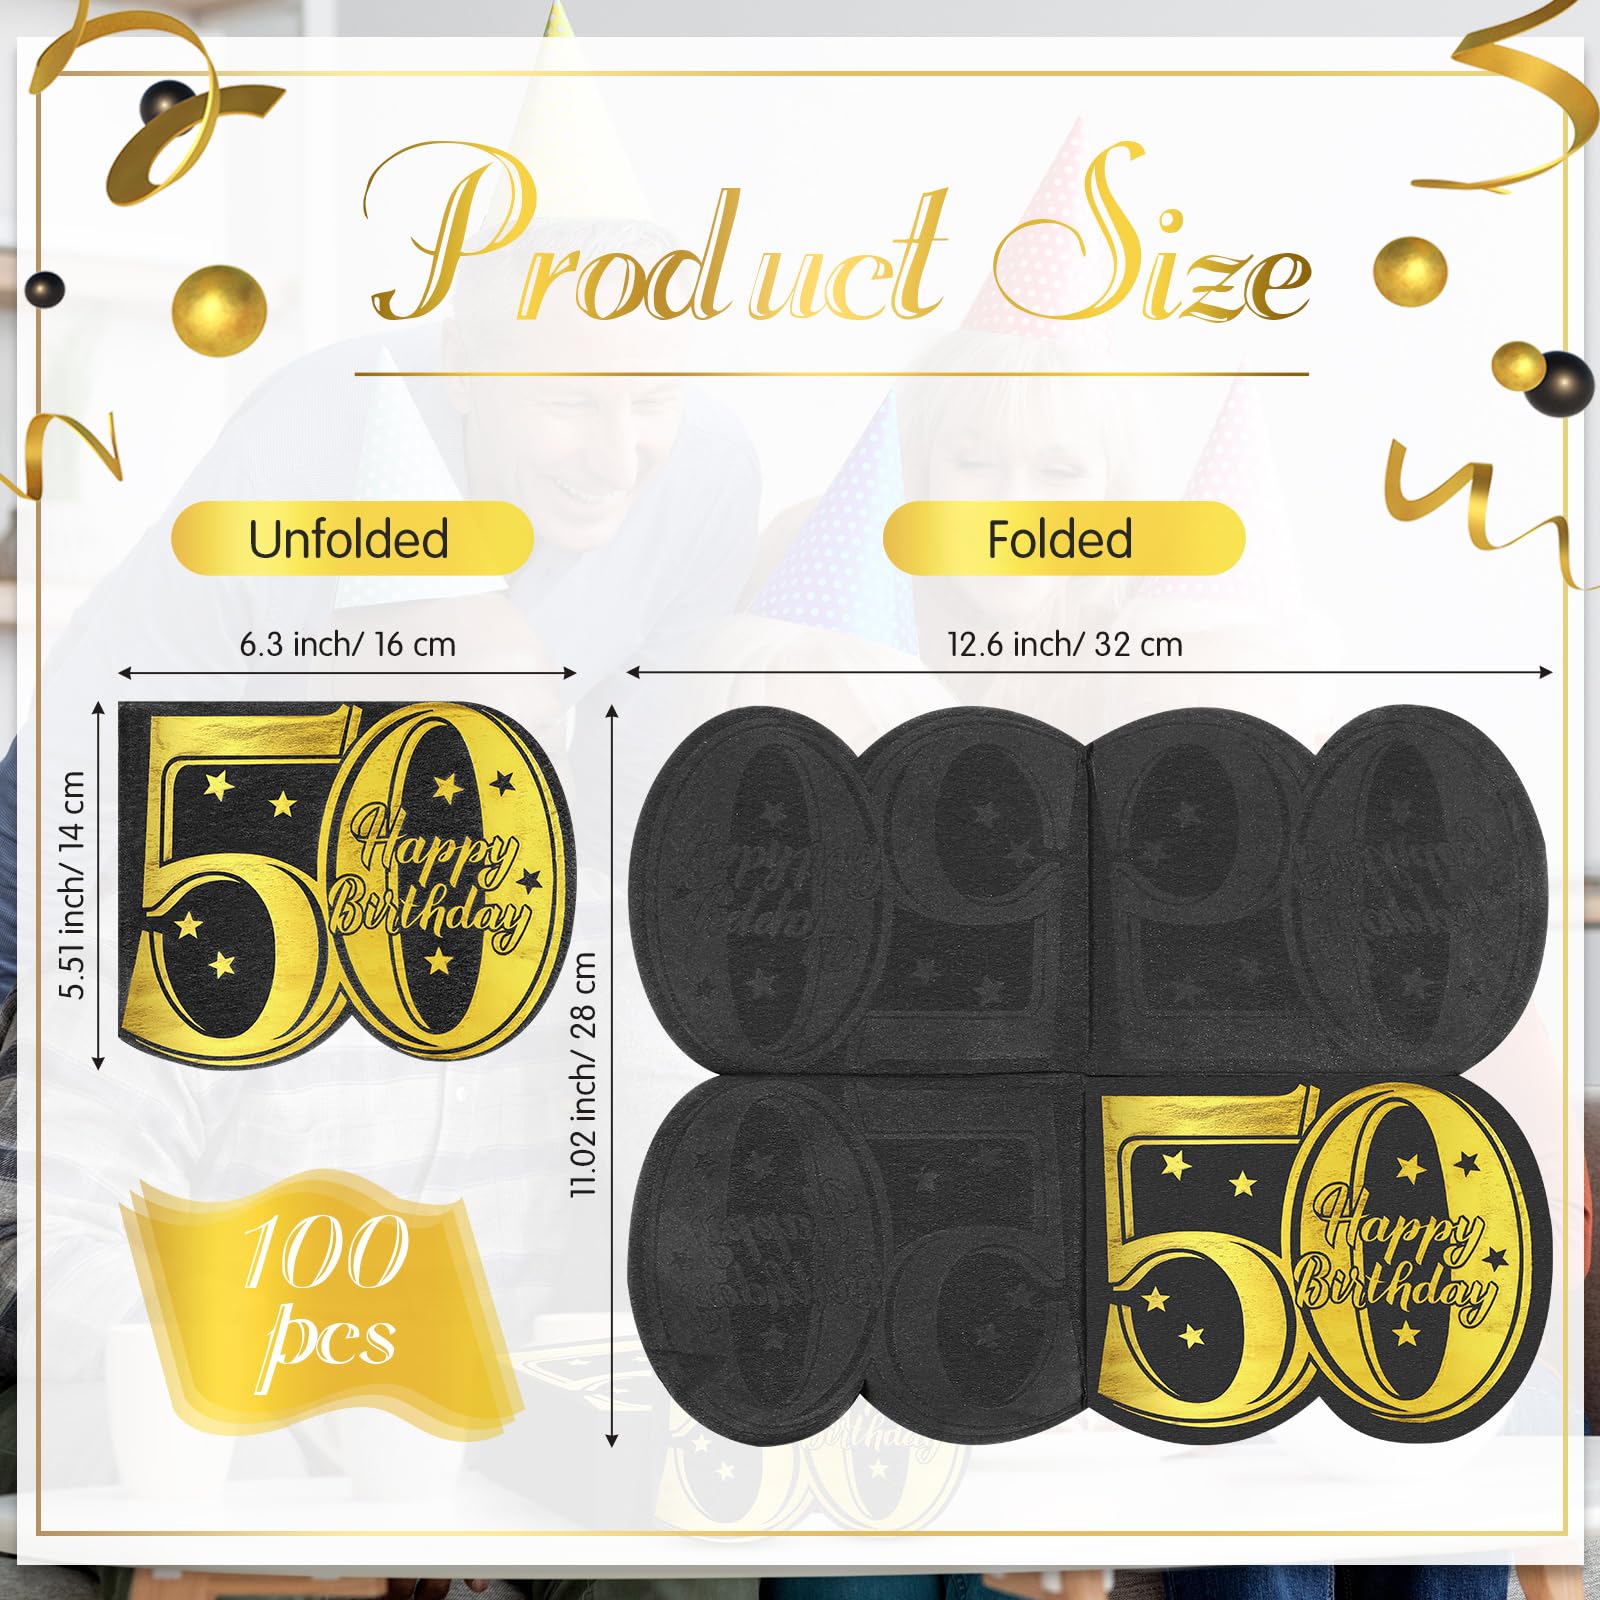 Pasimy 100 Pcs 50th Birthday Napkins Black and Gold 50th Cocktail Napkins Disposable 50 Year Paper Napkins 50th Birthday Favors for 50th Anniversary Birthday Wedding Party Decorations